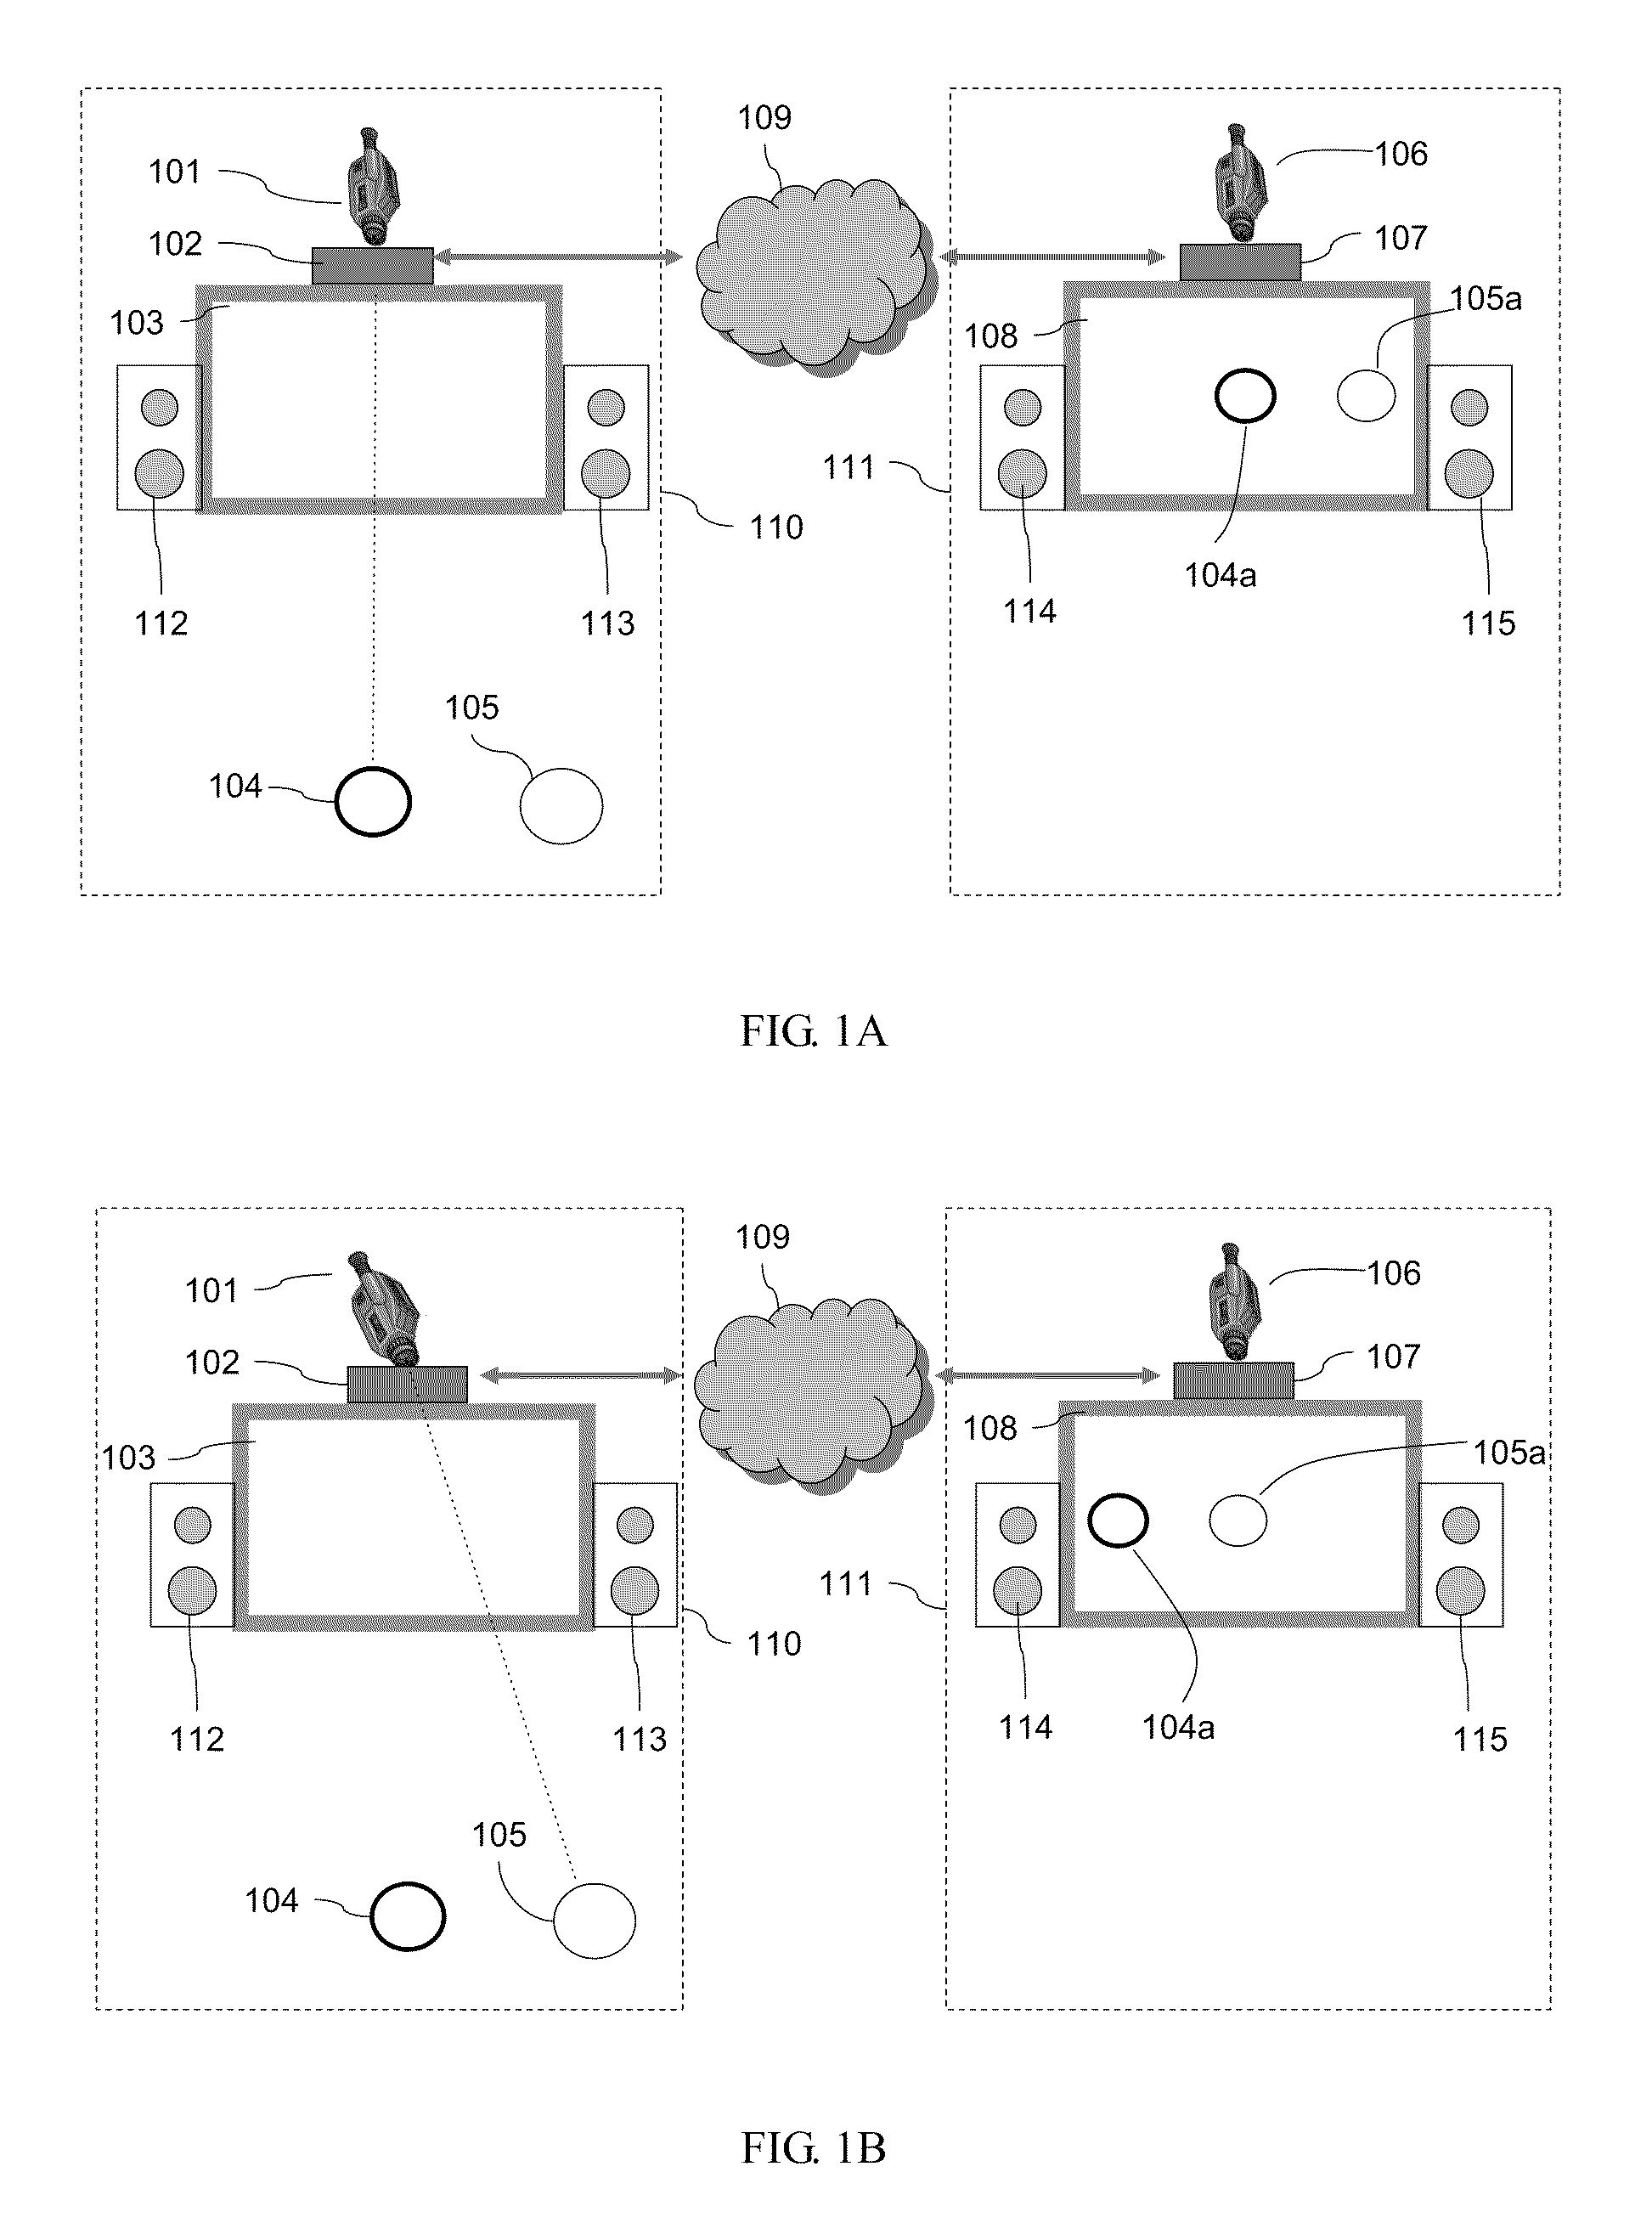 Method and apparatus for obtaining acoustic source location information and a multimedia communication system